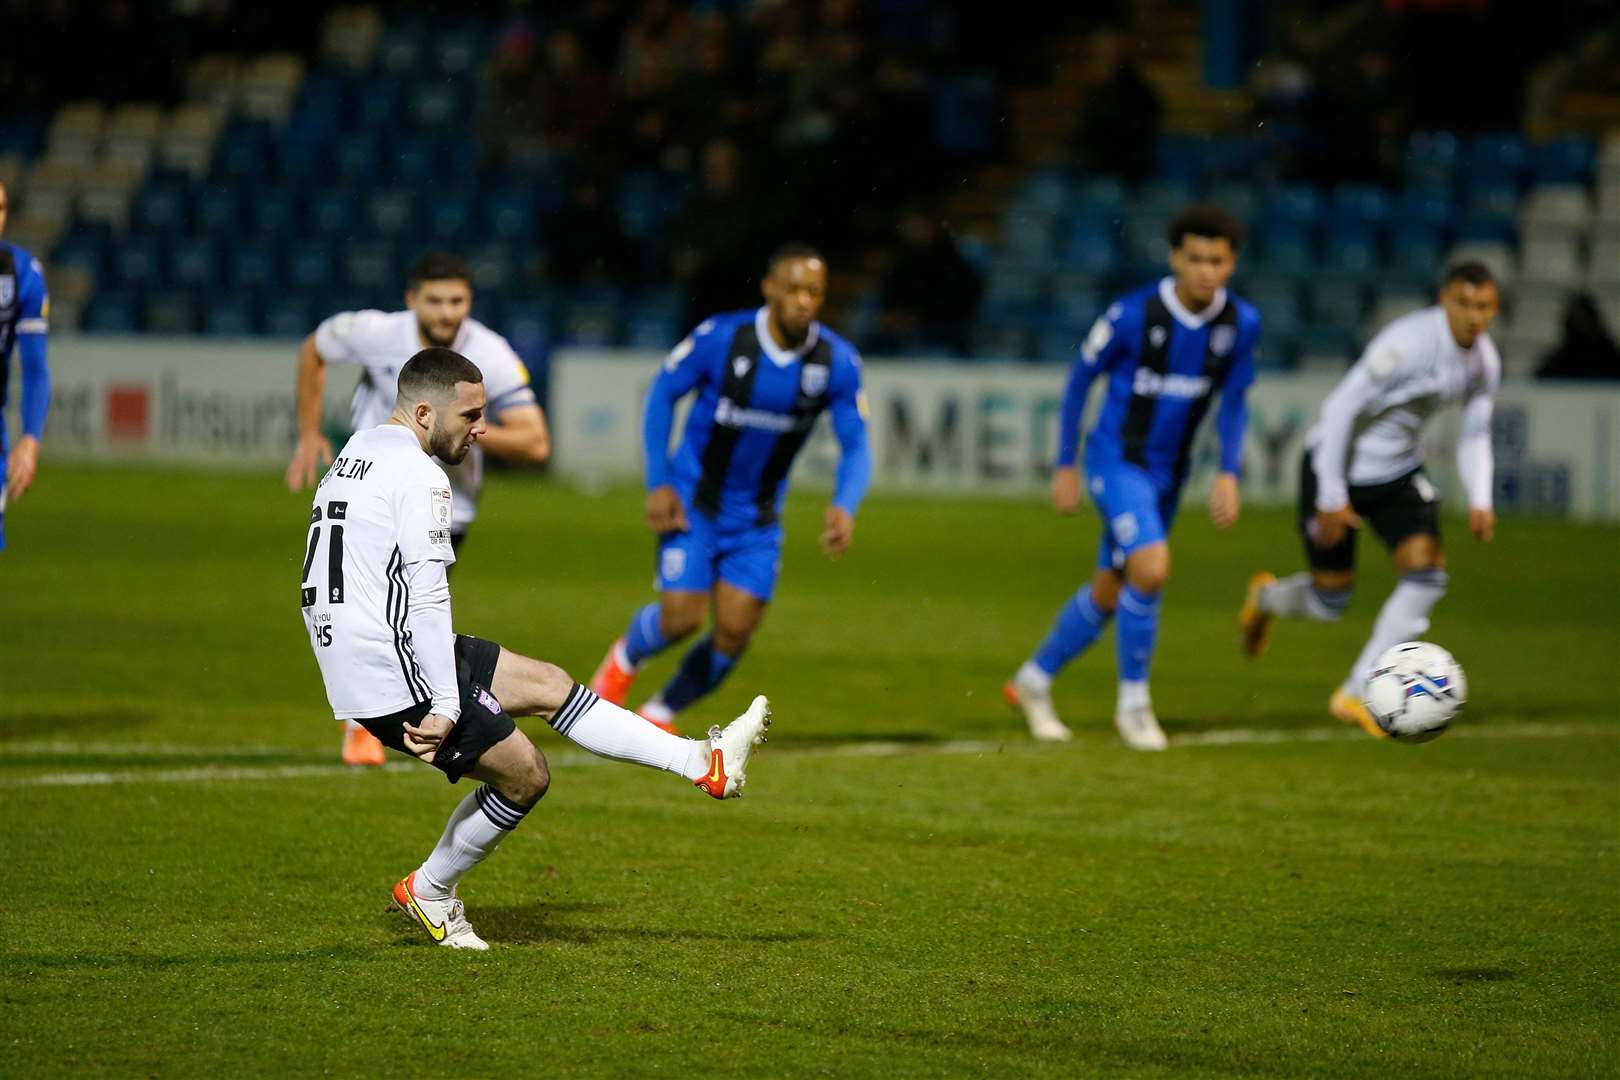 Conor Chaplin scores a penalty against Gillingham, making it 4-0 Picture: Andy Jones